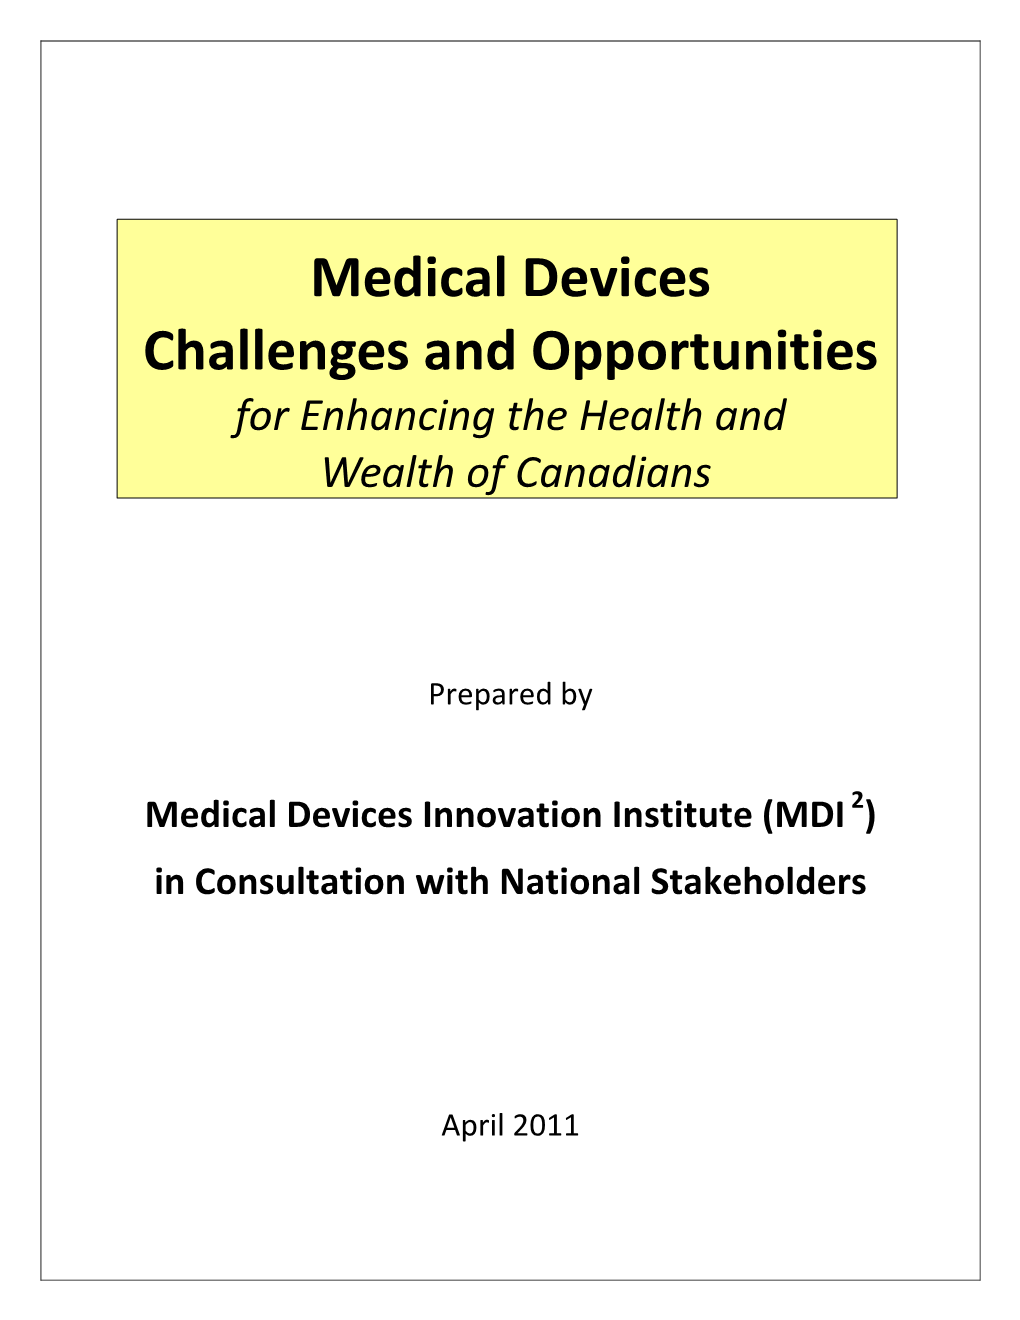 Medical Devices Challenges and Opportunities Report